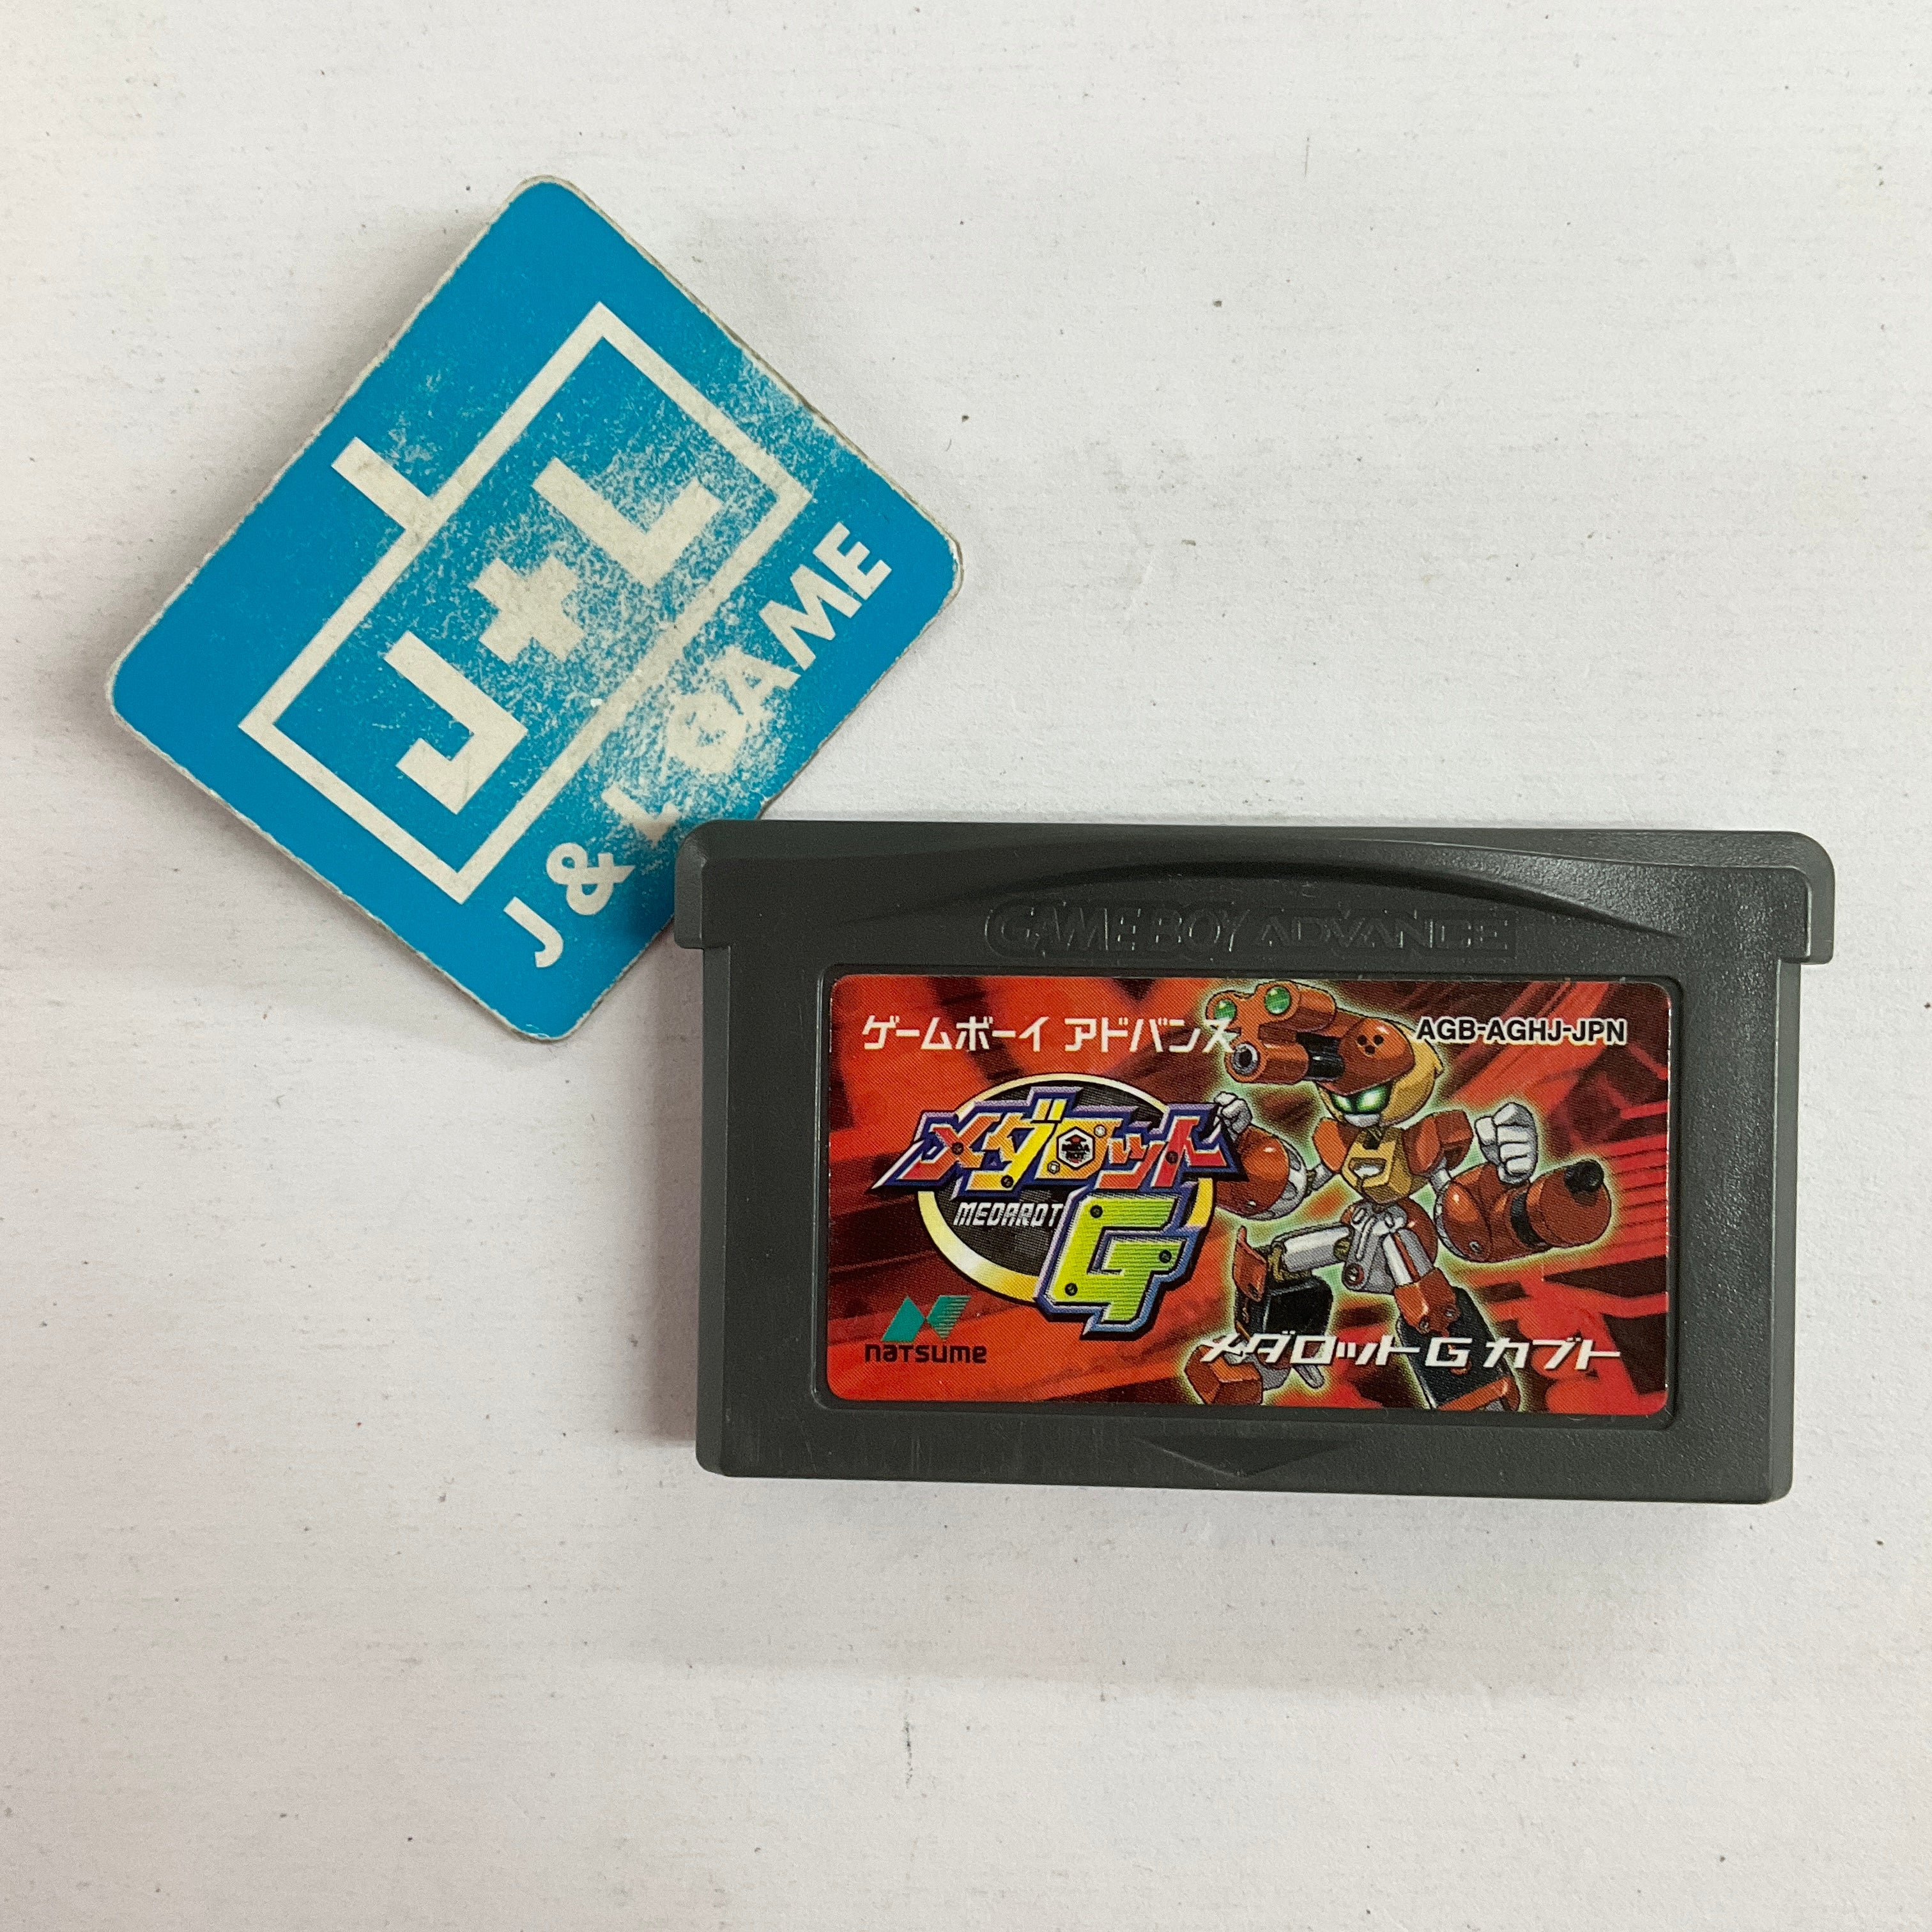 Medarot G: Kabuto Version - (GBA) Game Boy Advance [Pre-Owned] (Japanese Import) Video Games Natsume   